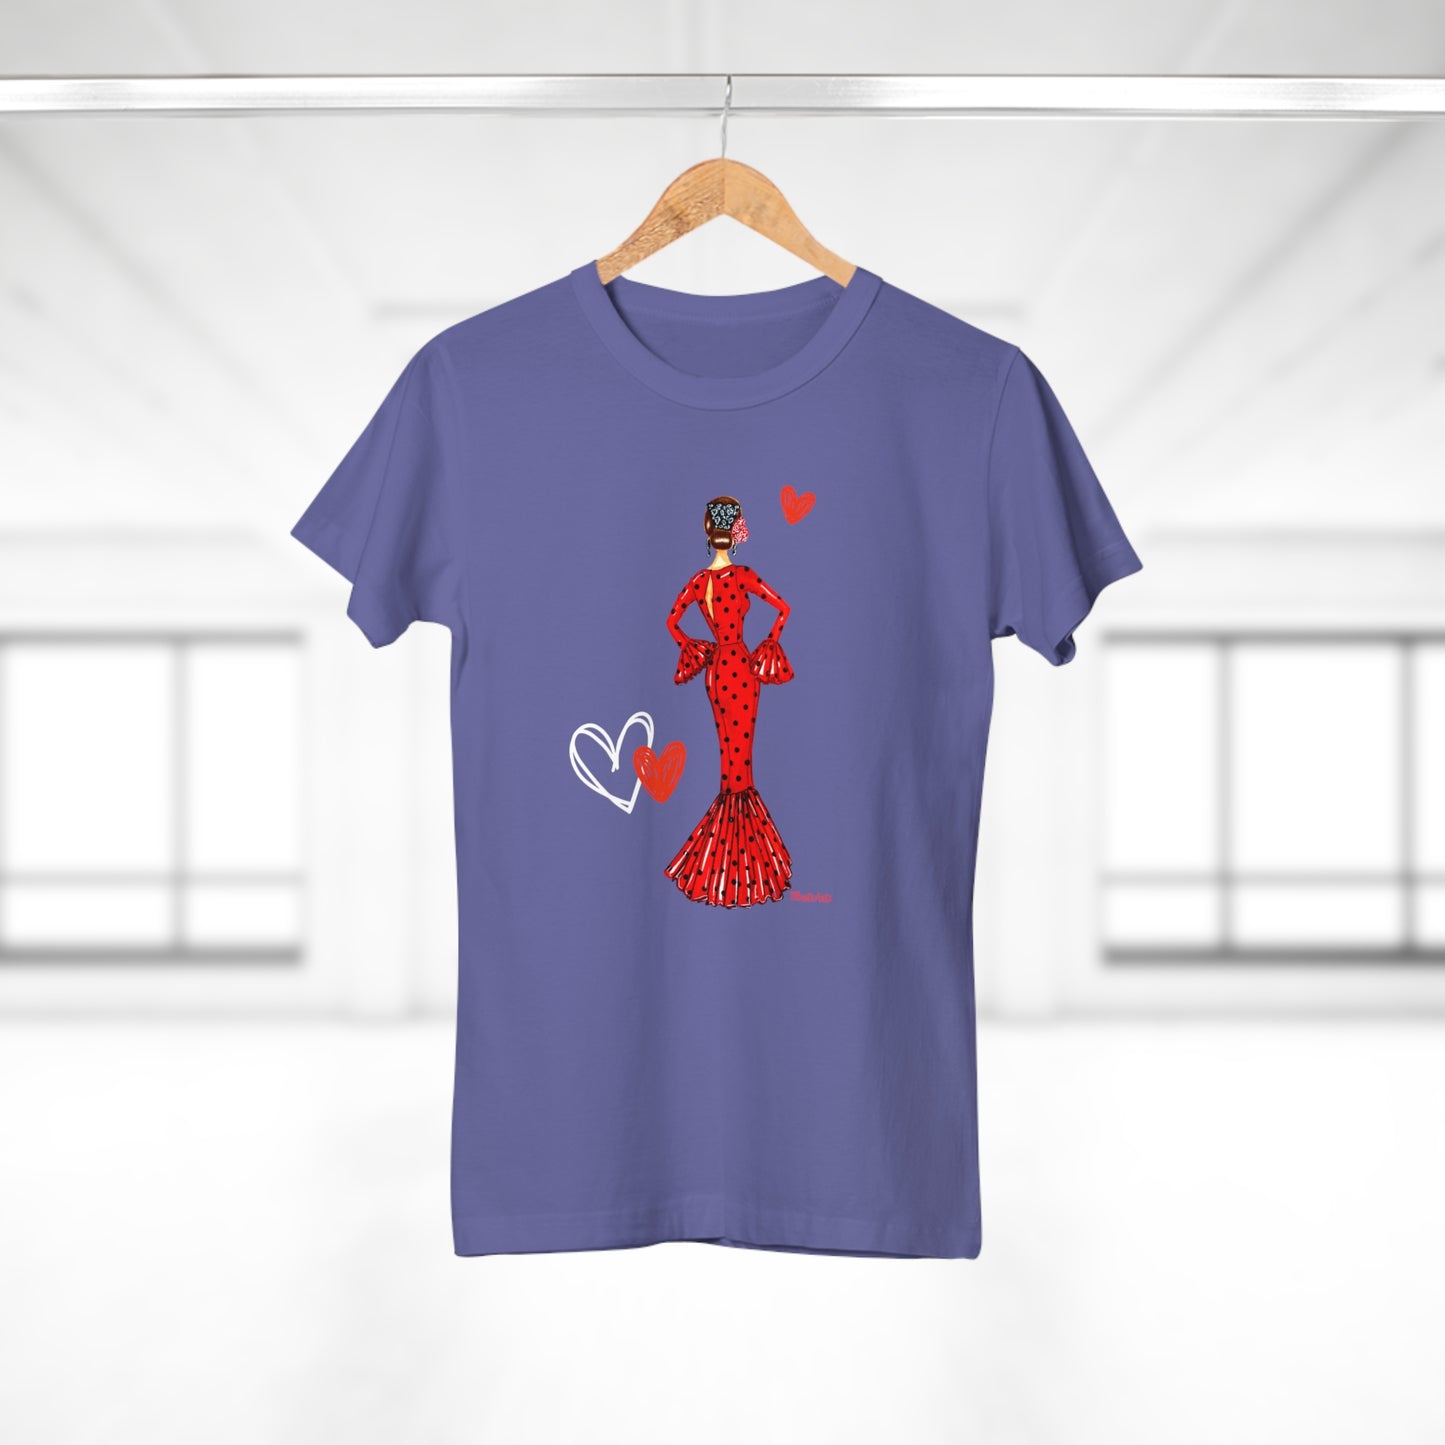 a t - shirt with a woman in a red dress on a hanger